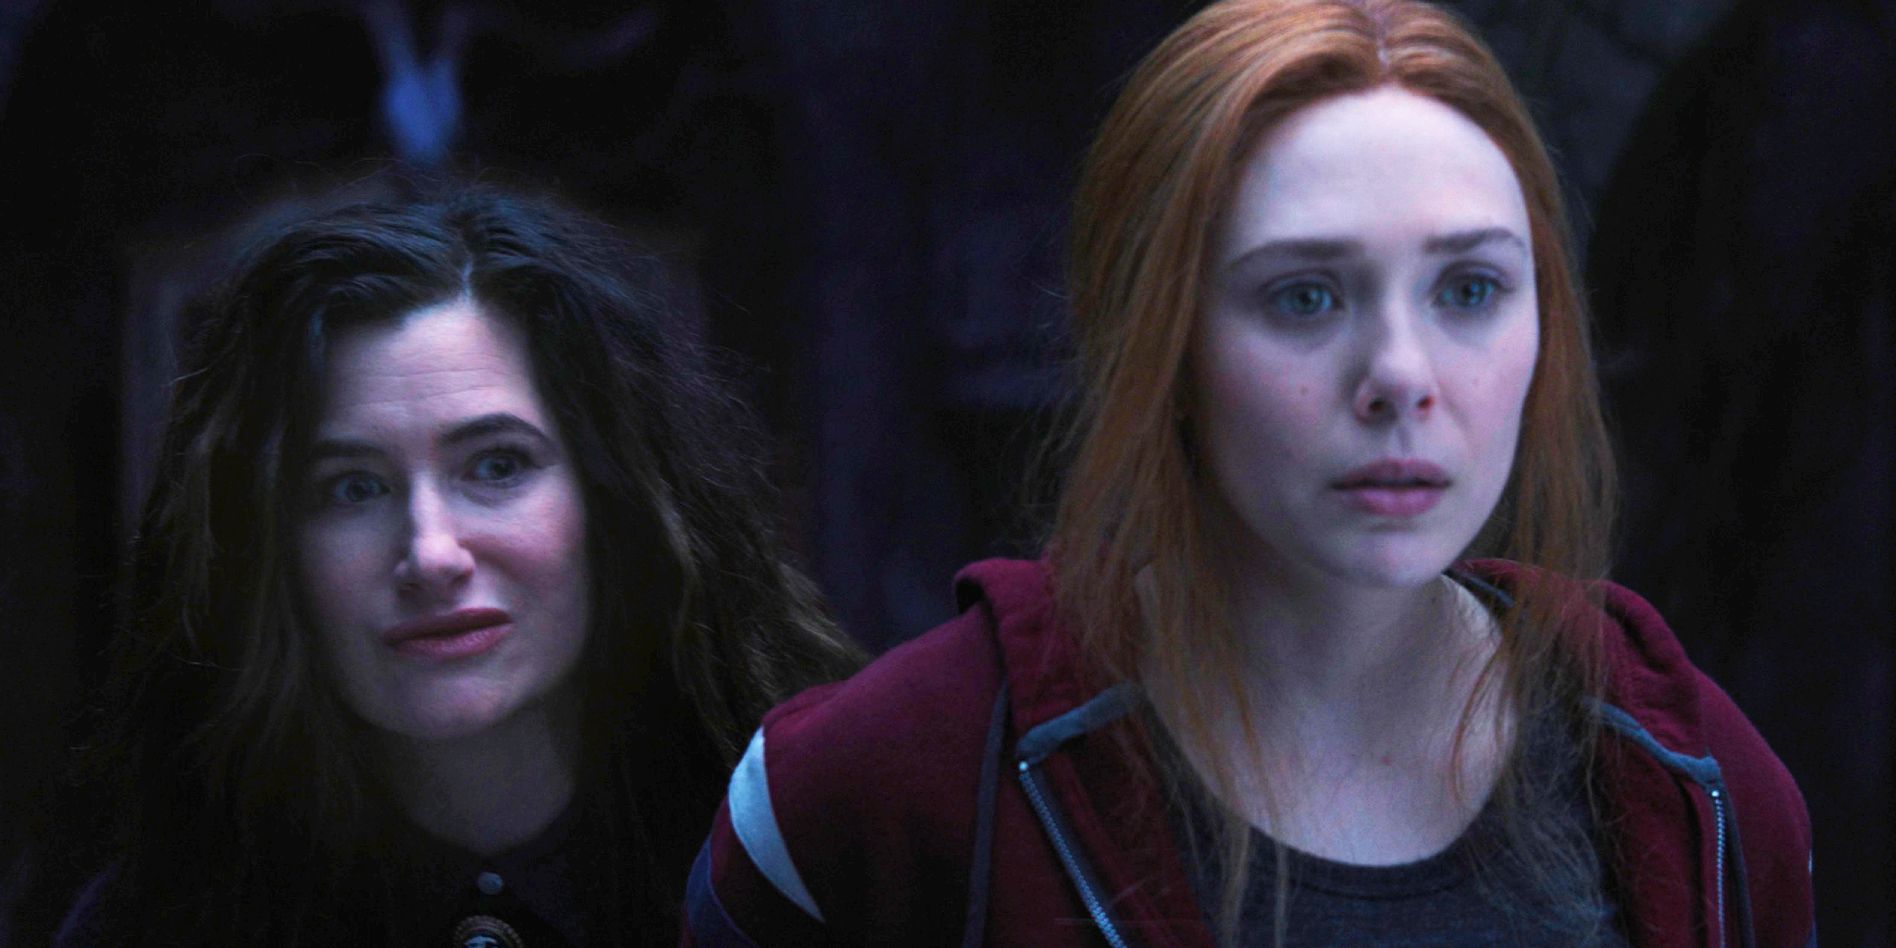 Kathryn Hahn as Agatha Harkness and Elizabeth Olsen as Wanda Maximoff Scarlet Witch looking concerned in WandaVision